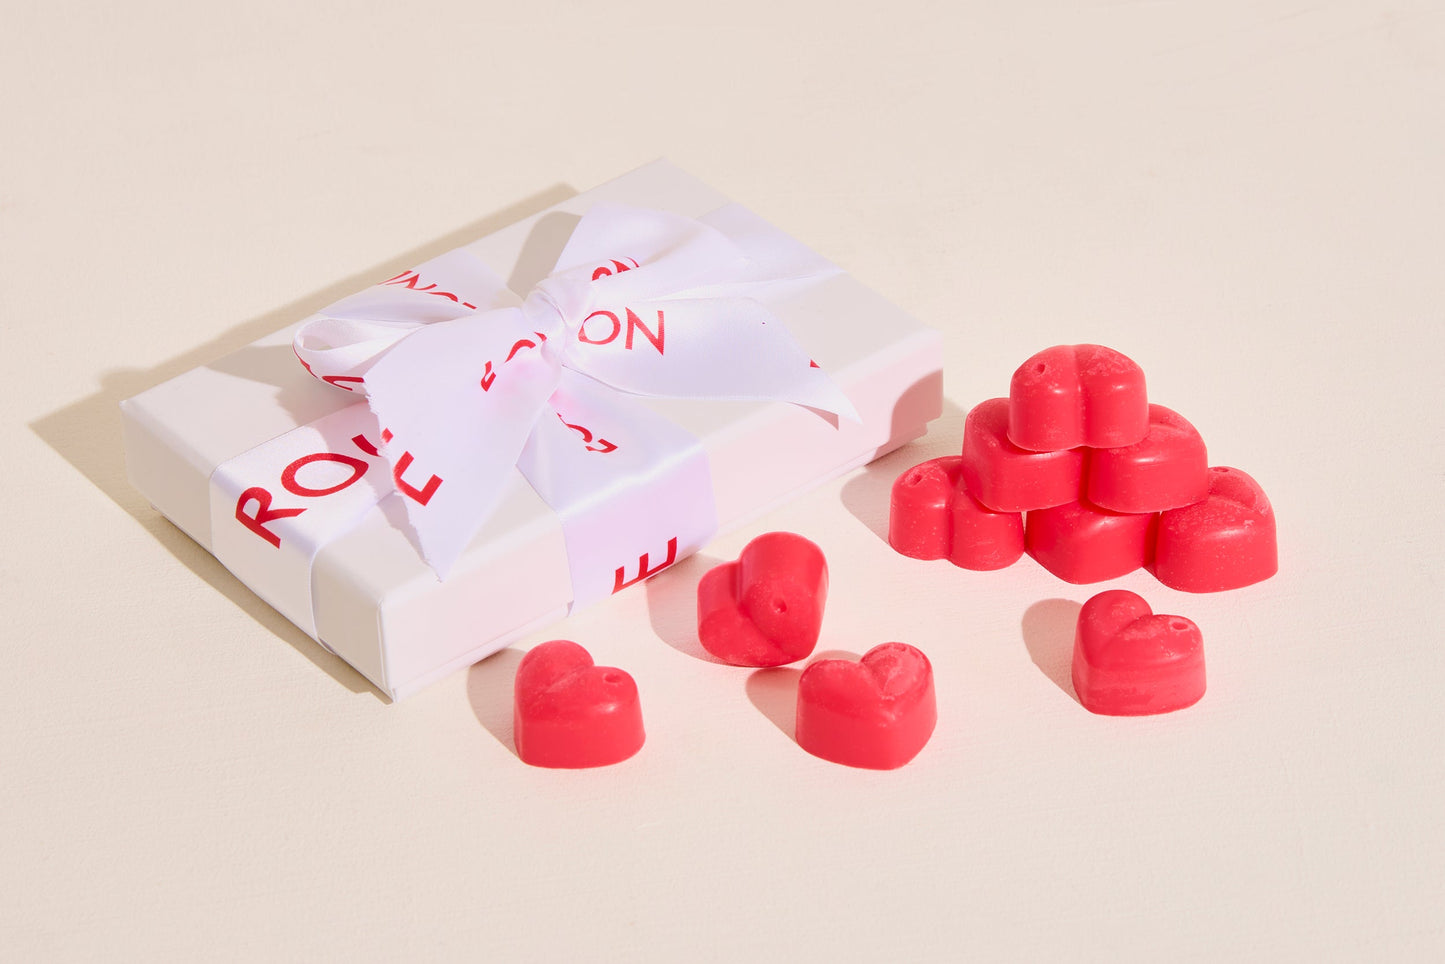 Hug TESTER - Orange Blossom Luxury Scented Wax Melts - By Rouge London